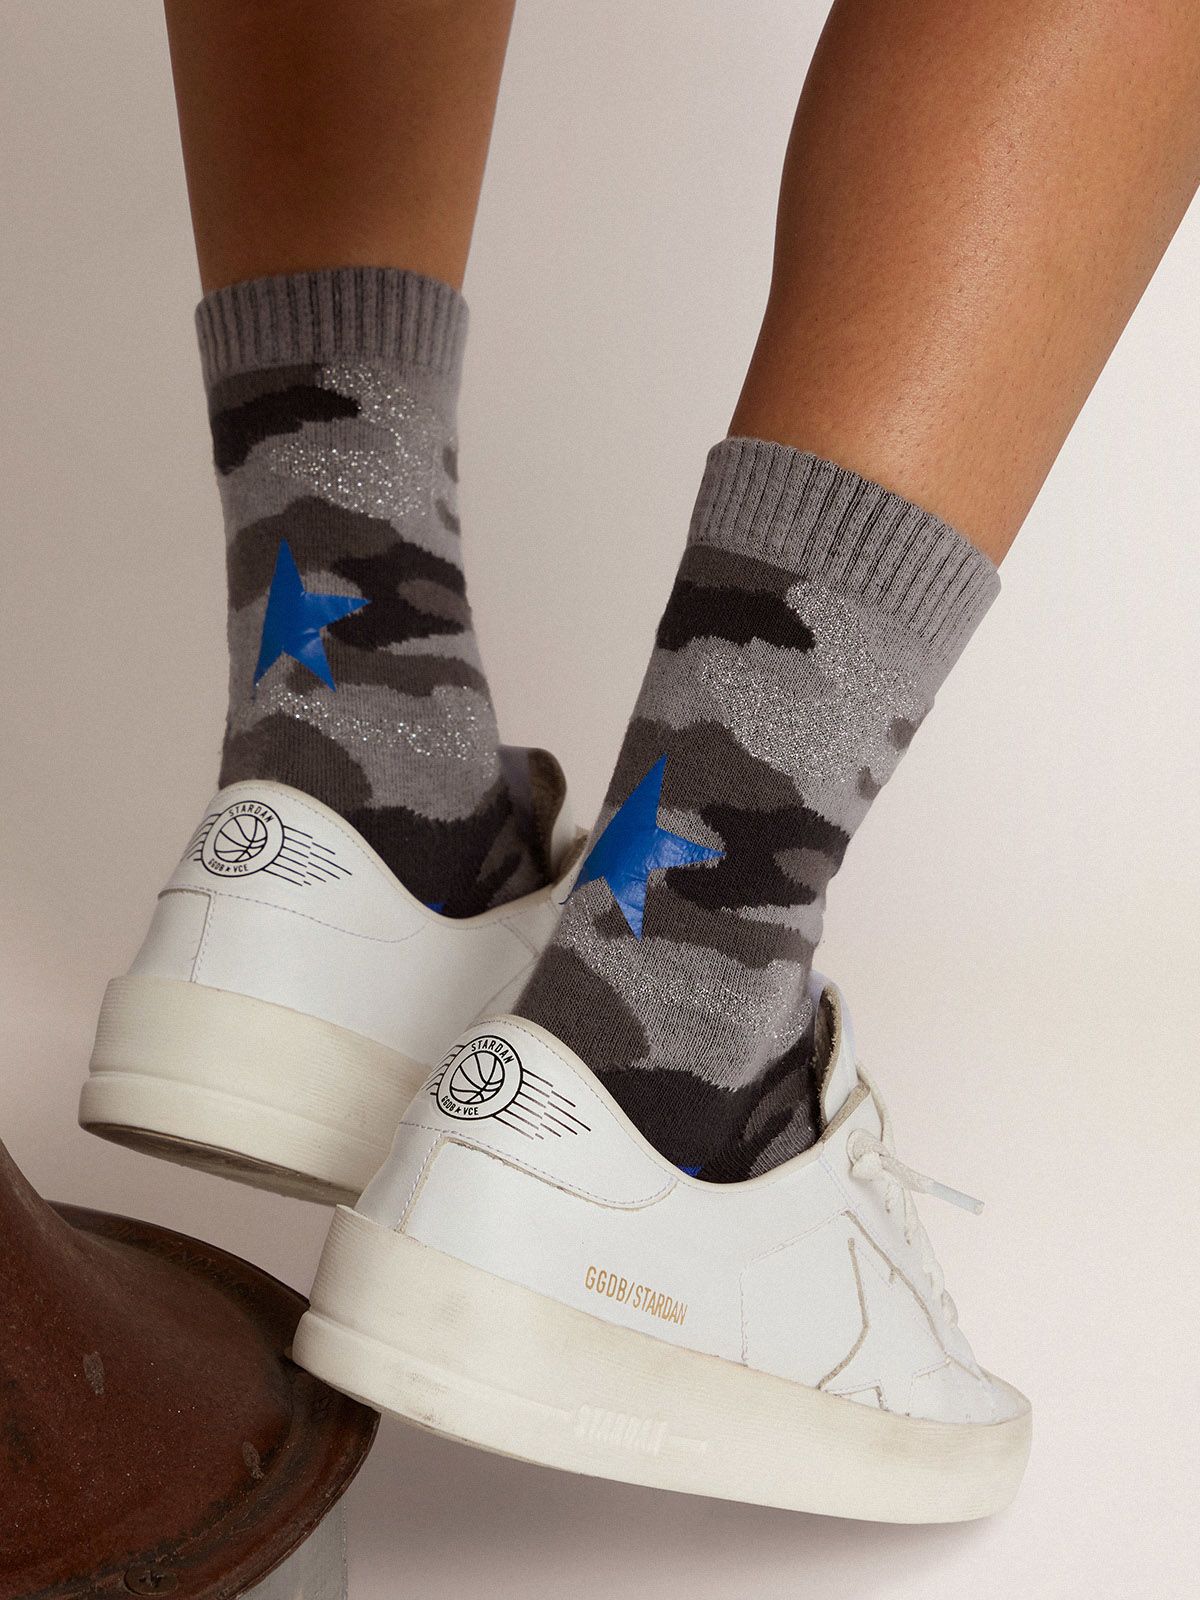 WS OVER THE KNEE FASHION SOCKS CAMOUFLAGE #